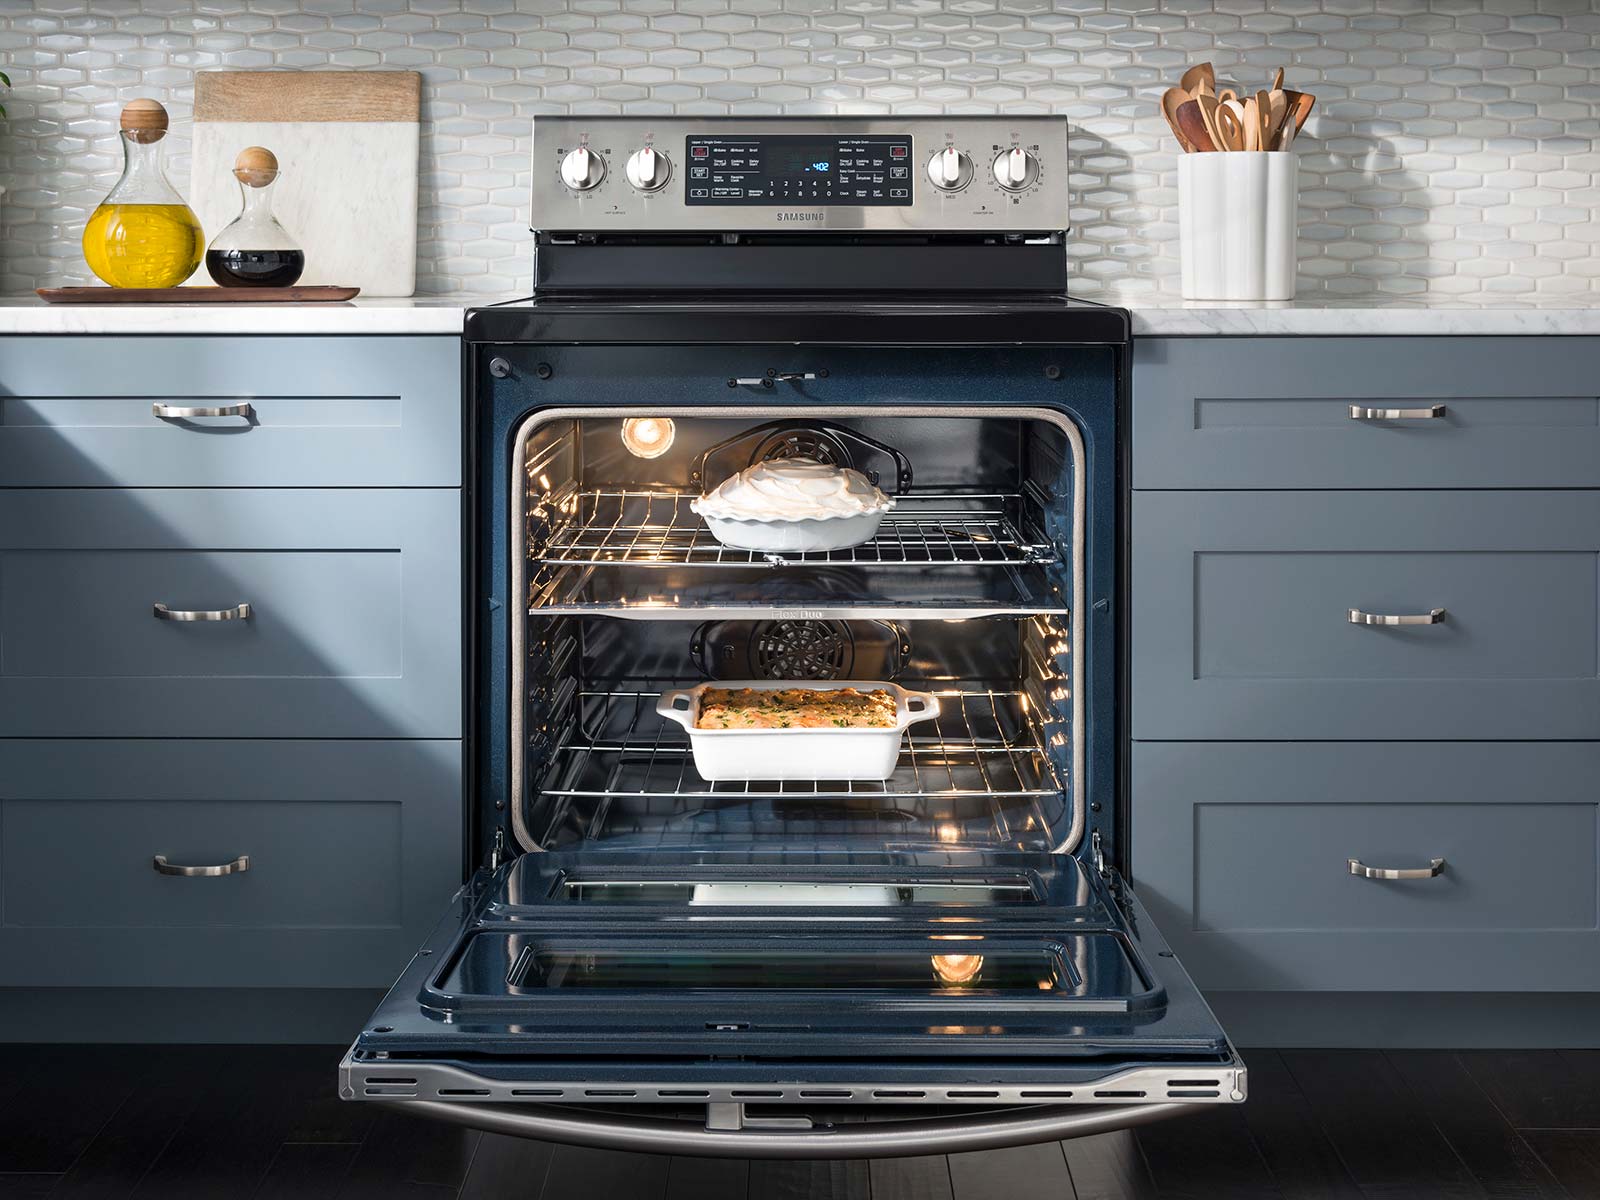 Thumbnail image of 5.9 cu. ft. Freestanding Electric Range with Flex Duo™ & Dual Door in Stainless Steel